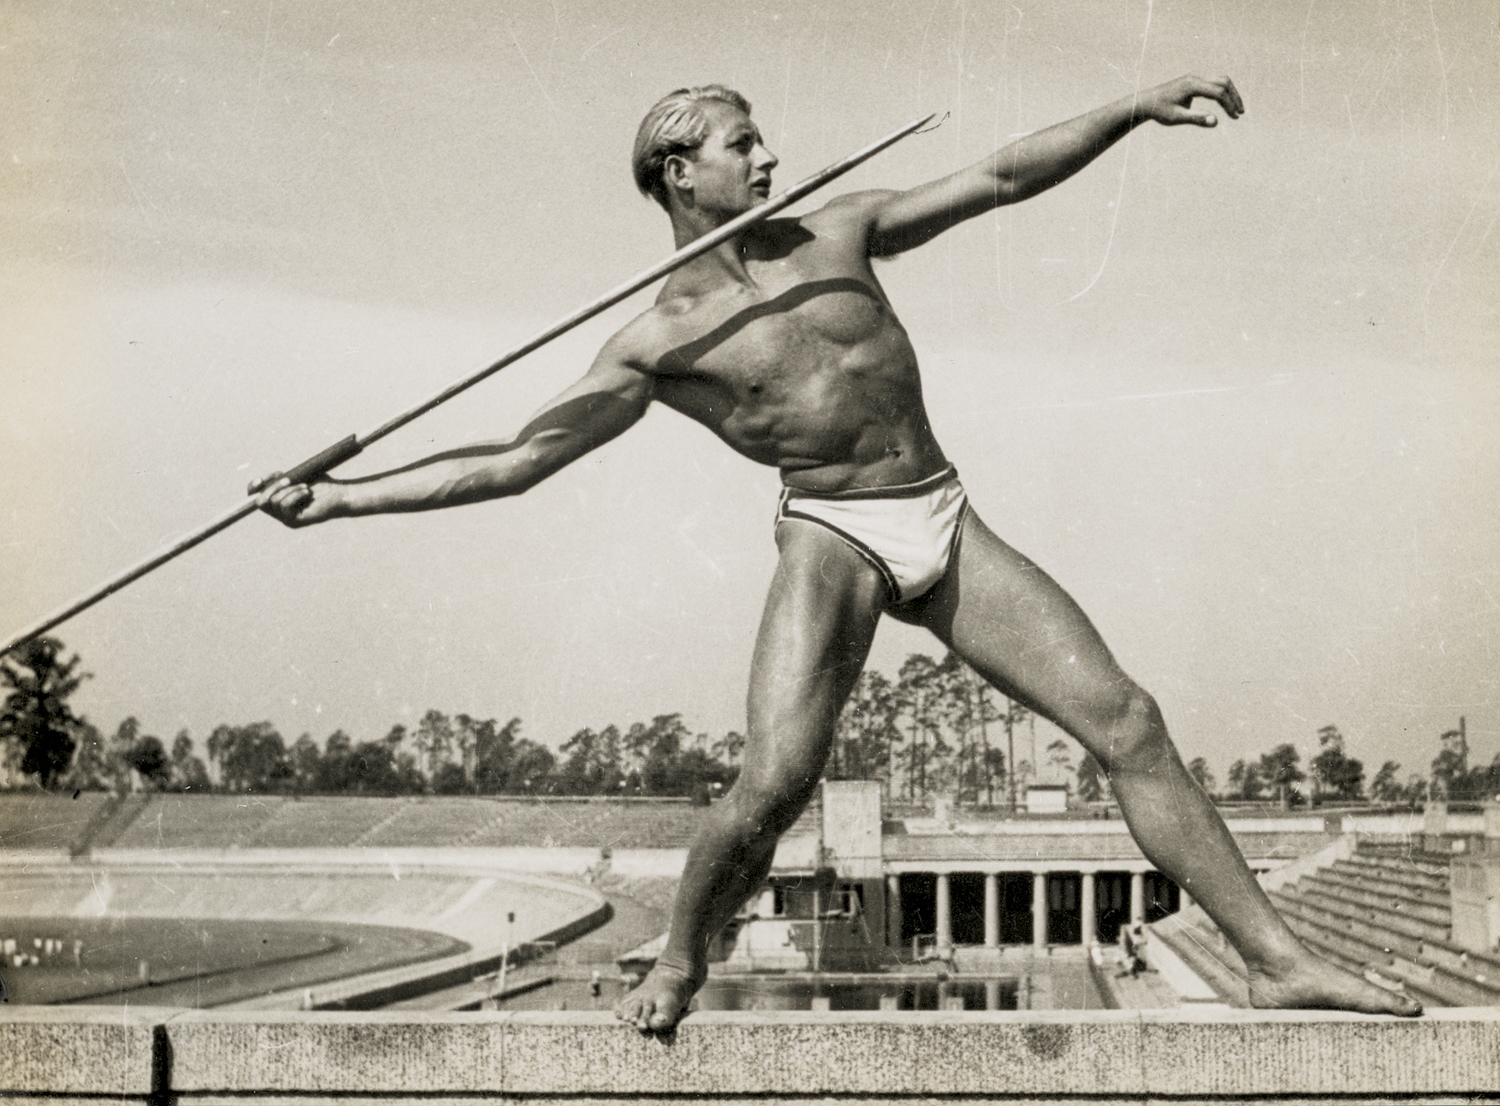 Artwork by Gerhard Riebicke, Two works: Male spear thrower (2), Made of gelatin silver print on doubleweight chamois paper (2)